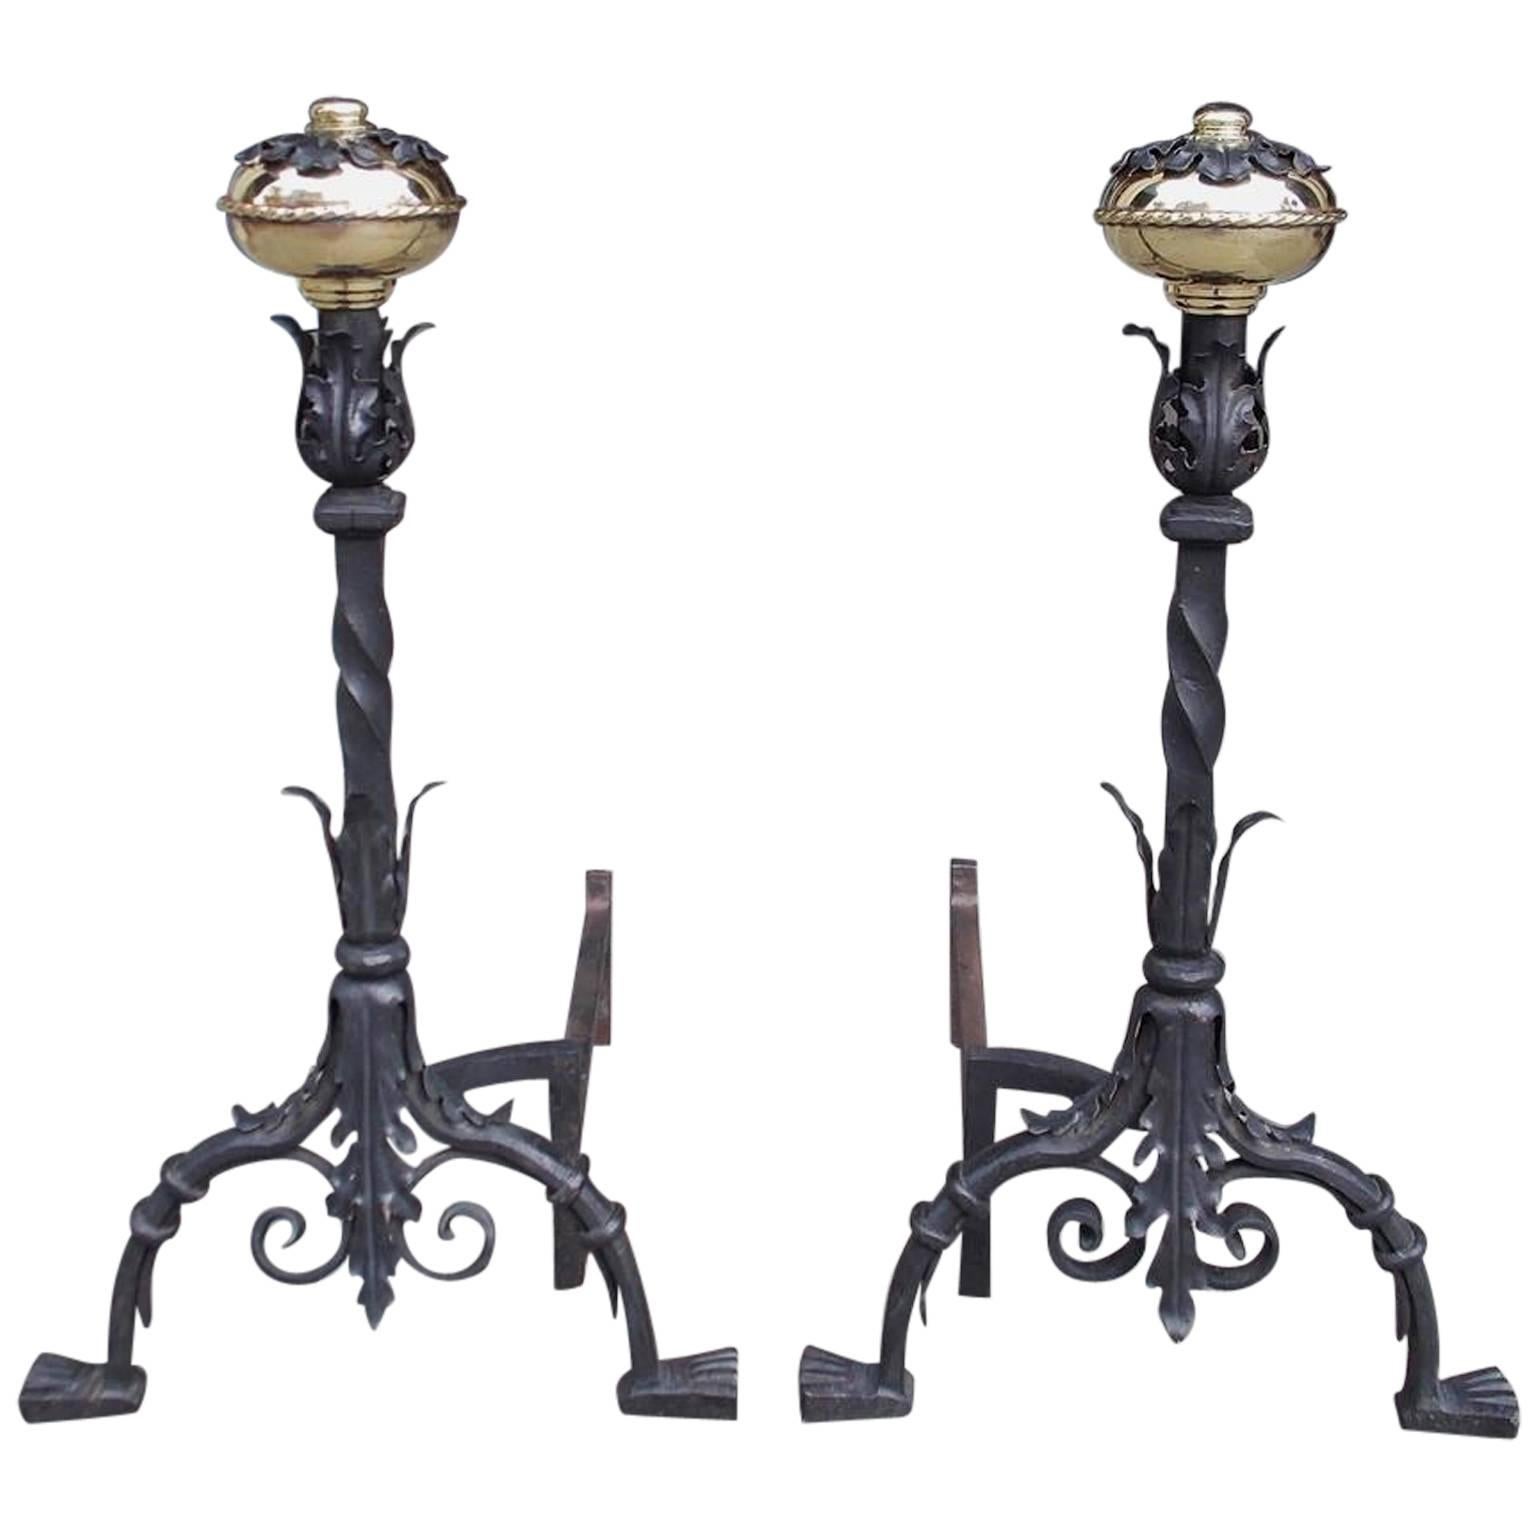 Pair of Italian Brass and Wrought Iron Floral Andirions, Circa 1810